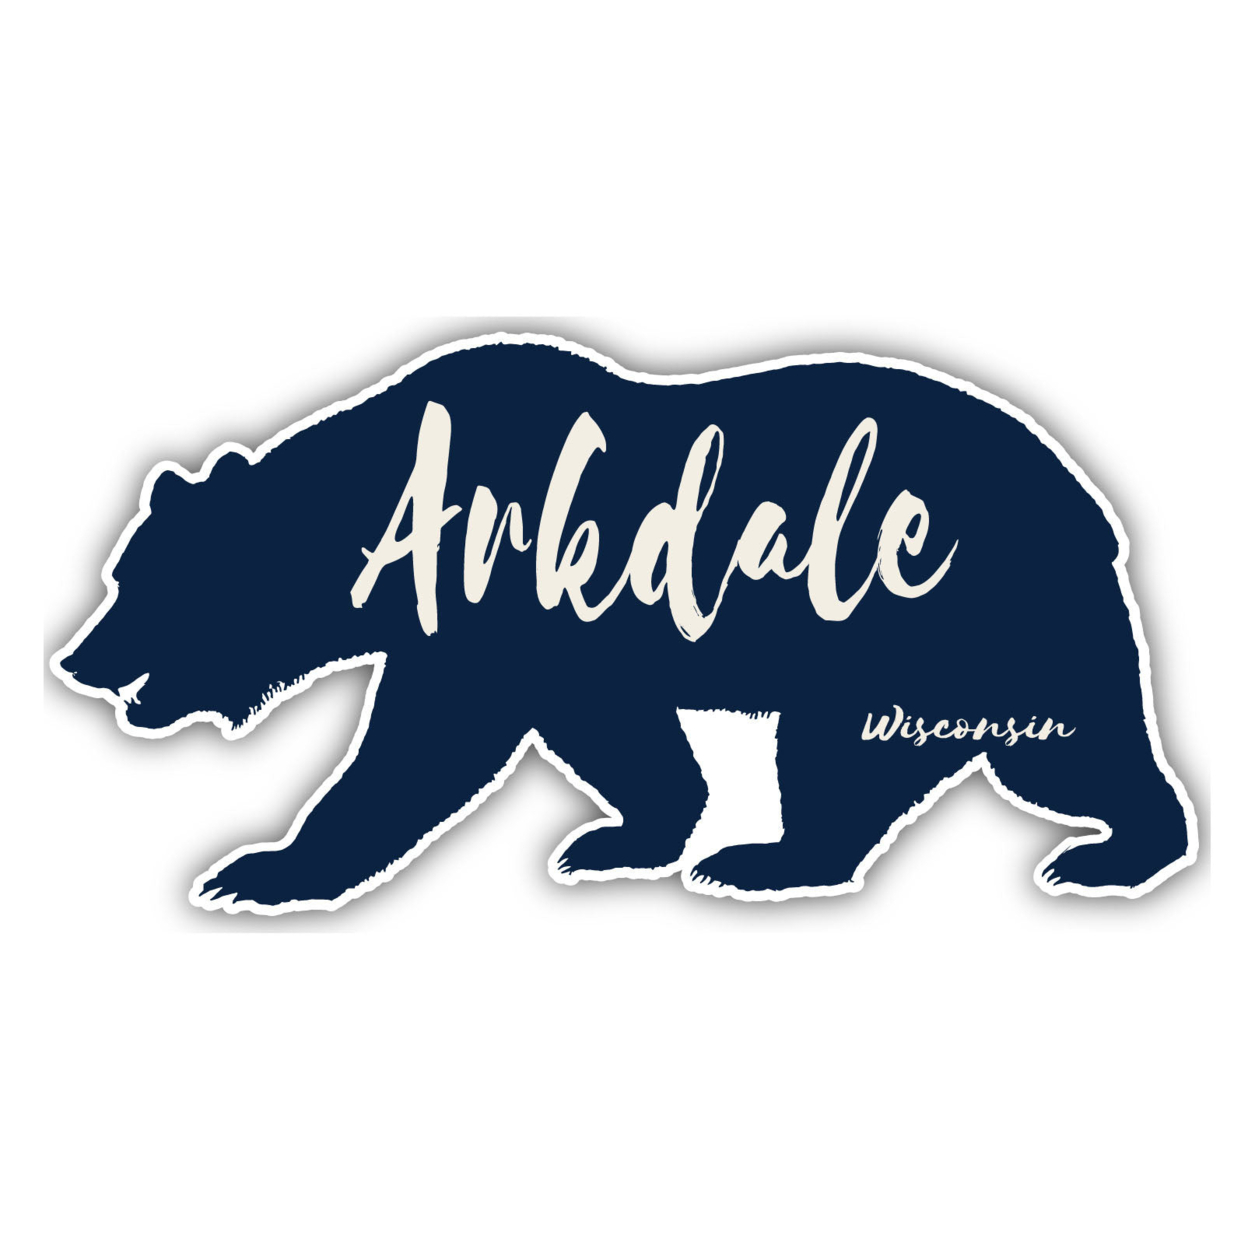 Arkdale Wisconsin Souvenir Decorative Stickers (Choose Theme And Size) - Single Unit, 4-Inch, Tent